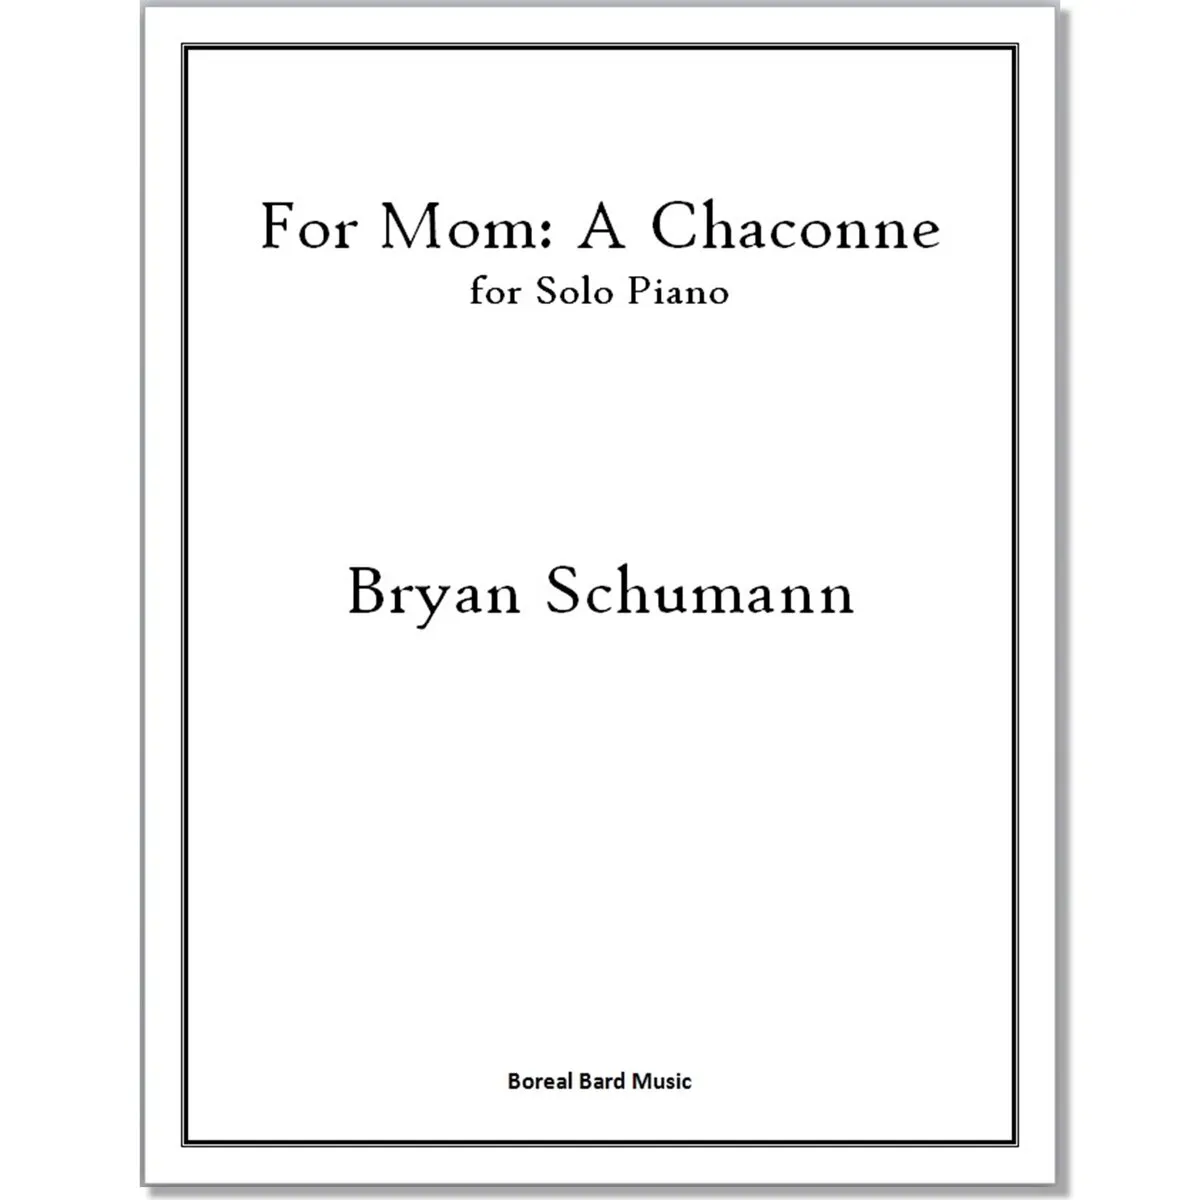 For Mom: A Chaconne for Solo Piano (sheet music)